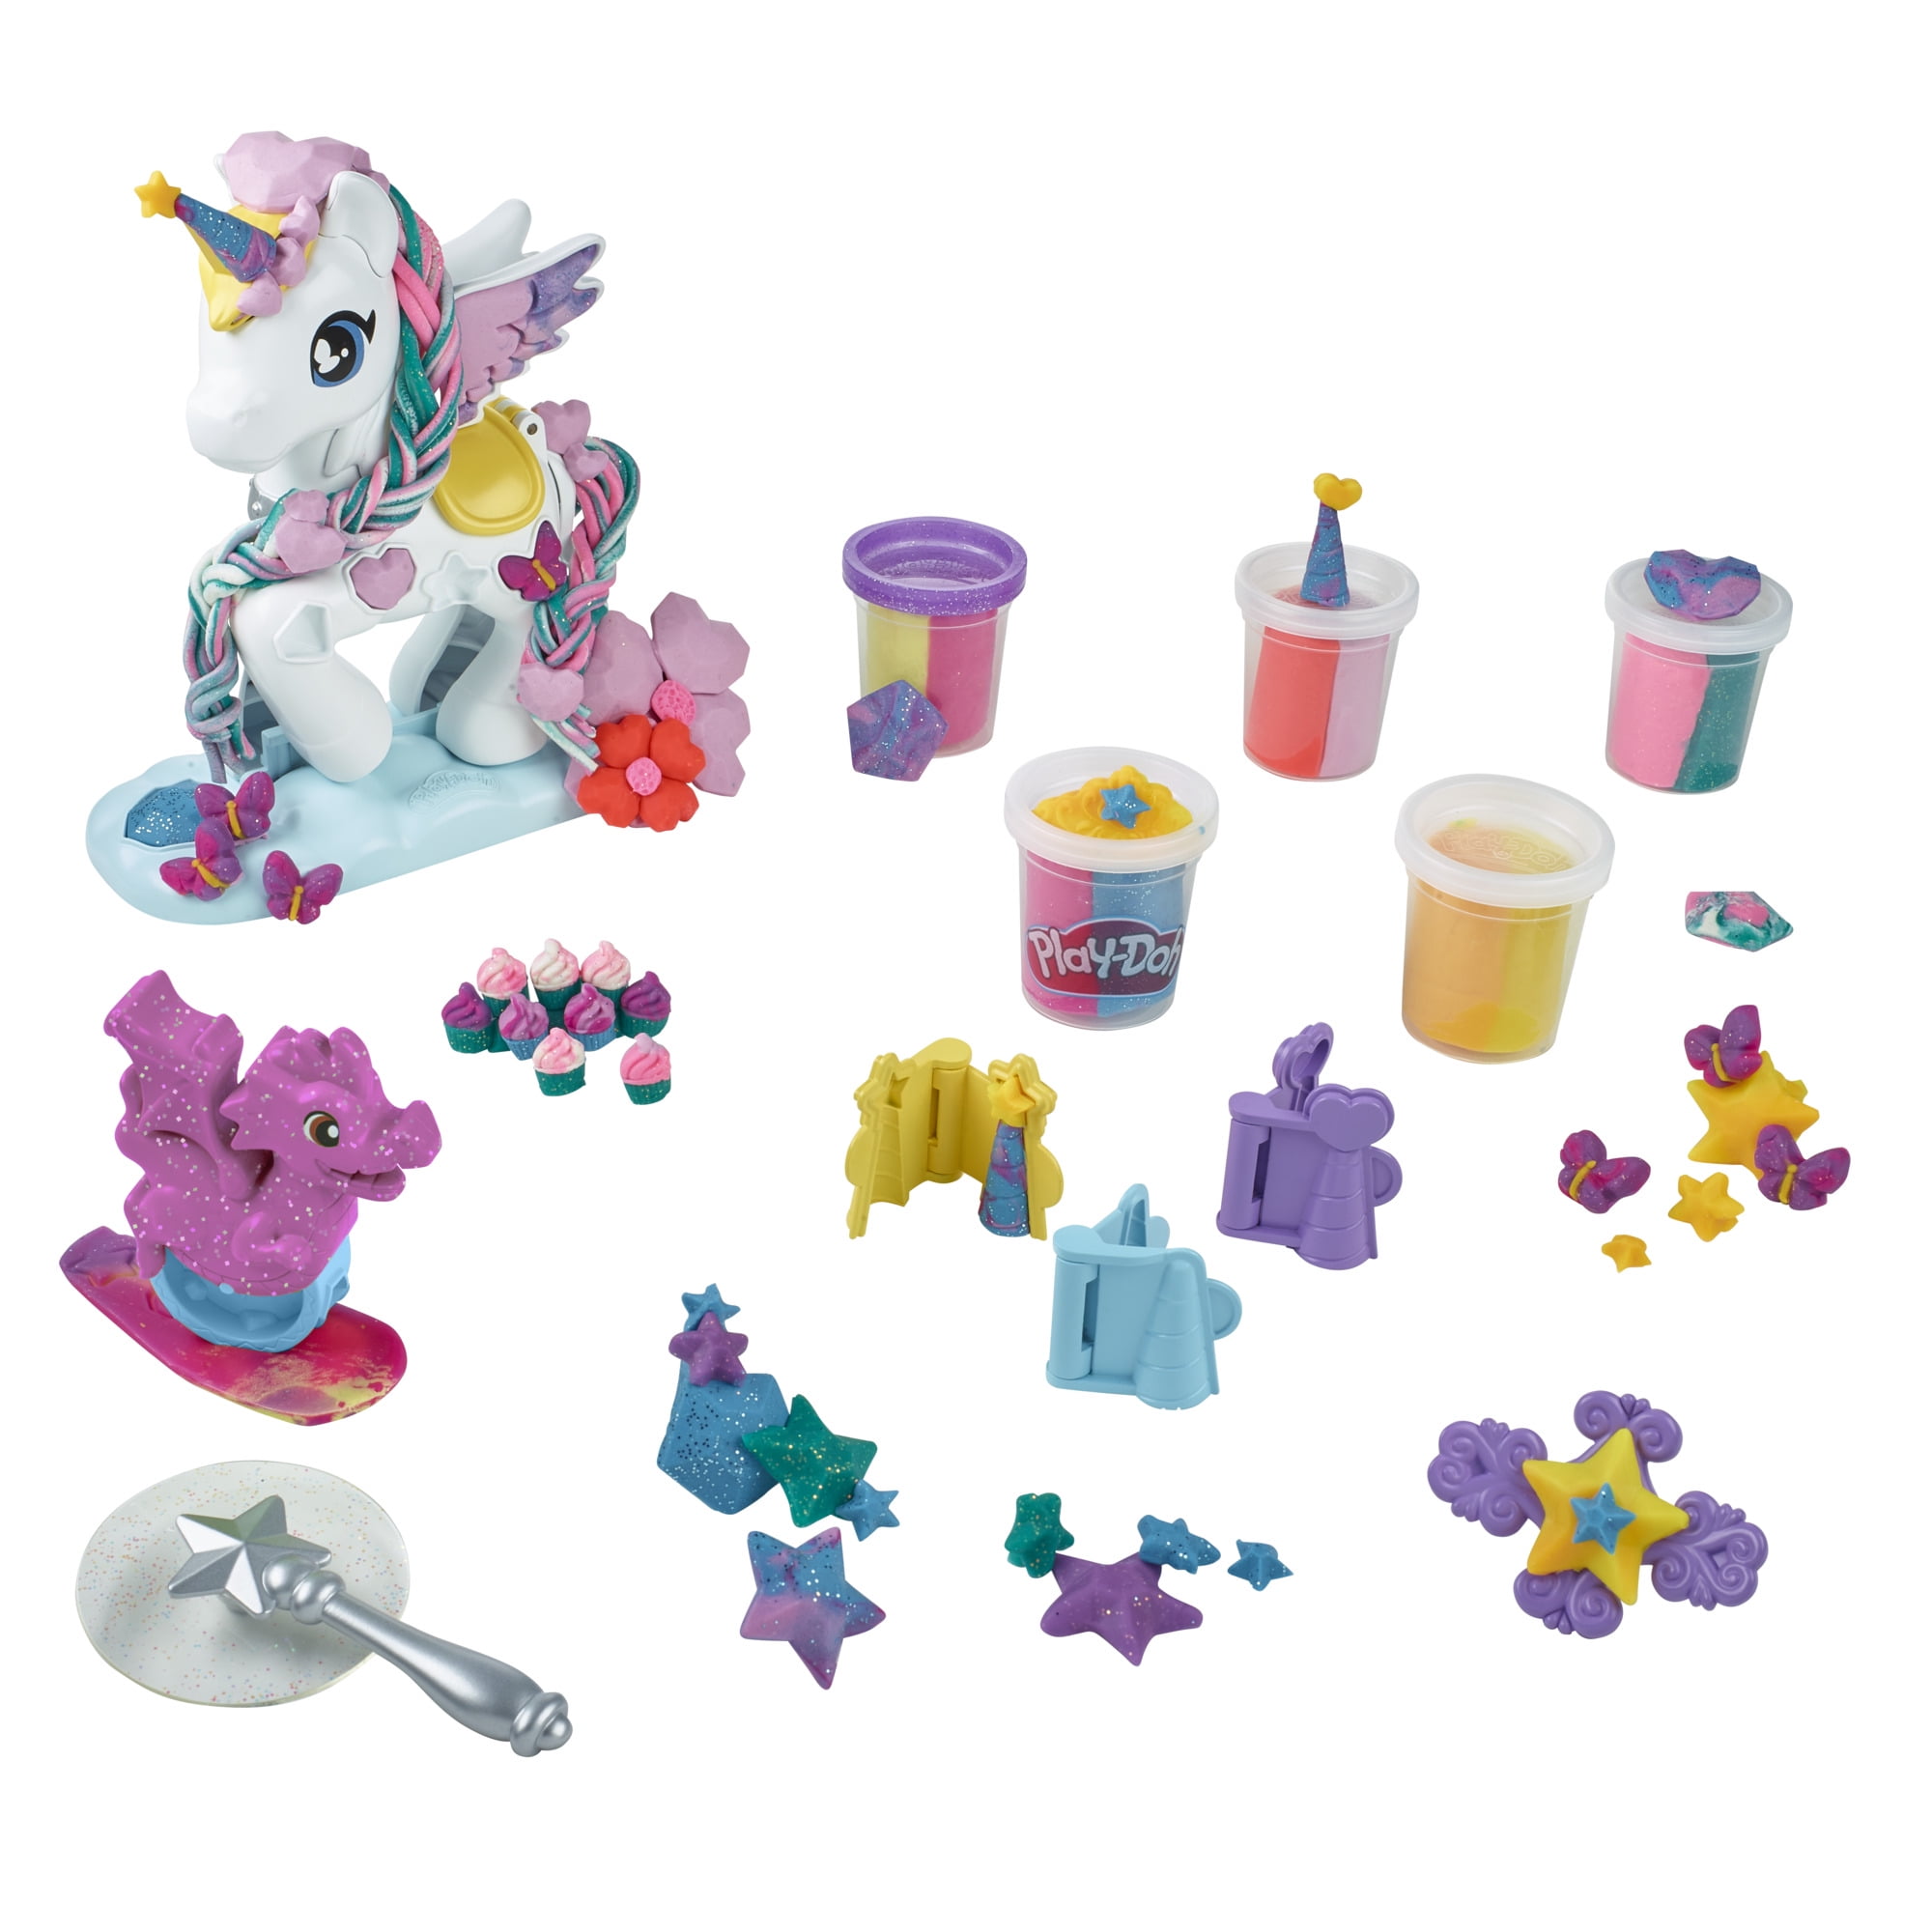 Play-Doh Magical Stylin' Unicorn Kids Playset, 5 Multicolor Cans, Unicorn Toys